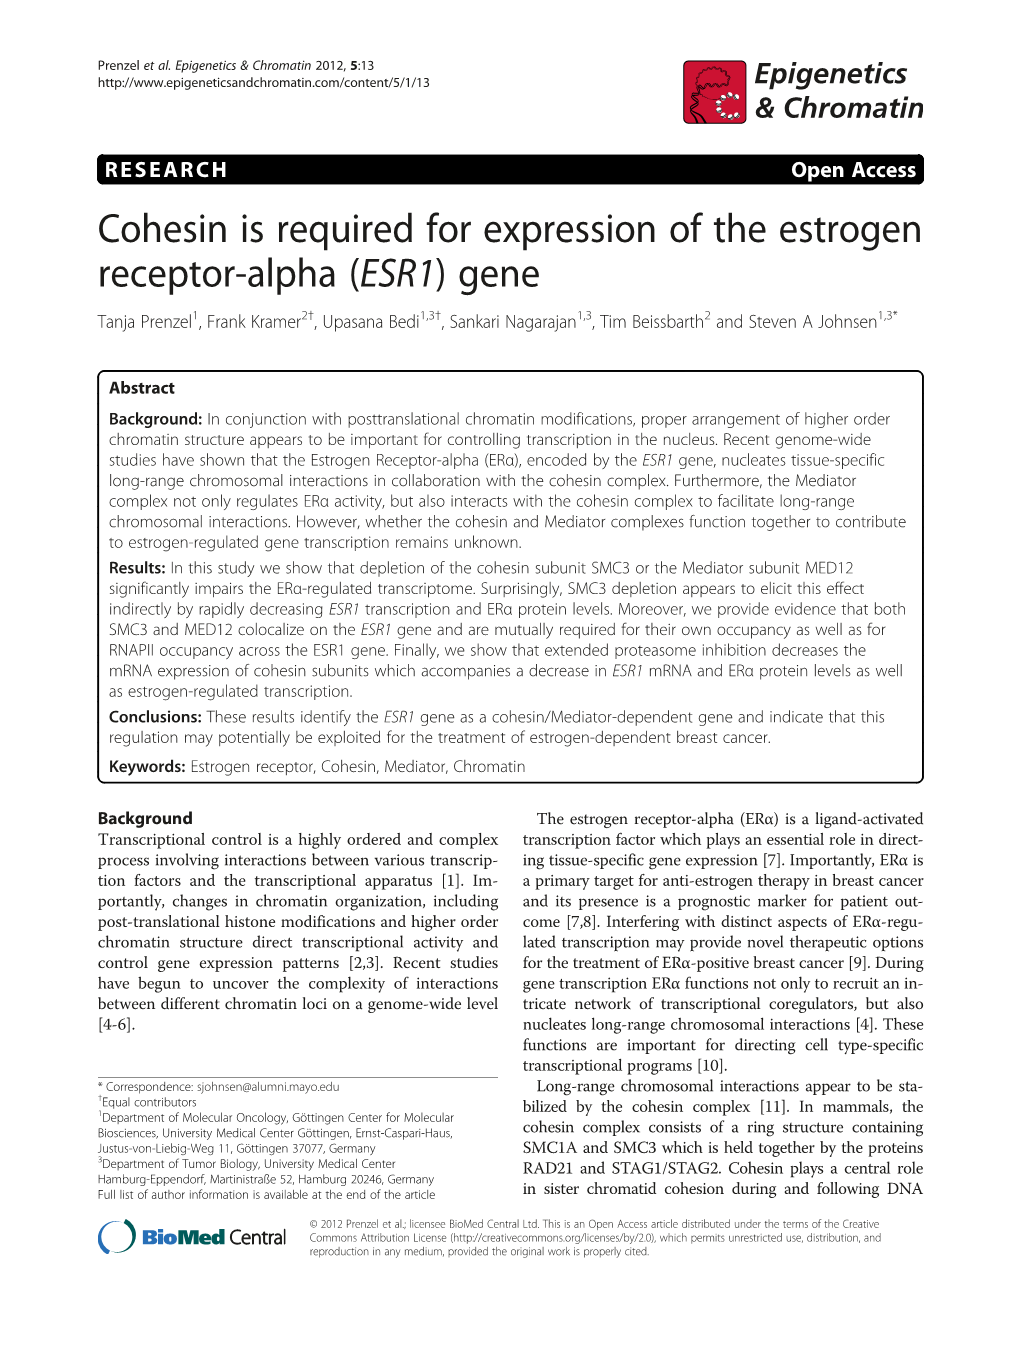 Cohesin Is Required for Expression of the Estrogen Receptor-Alpha (ESR1